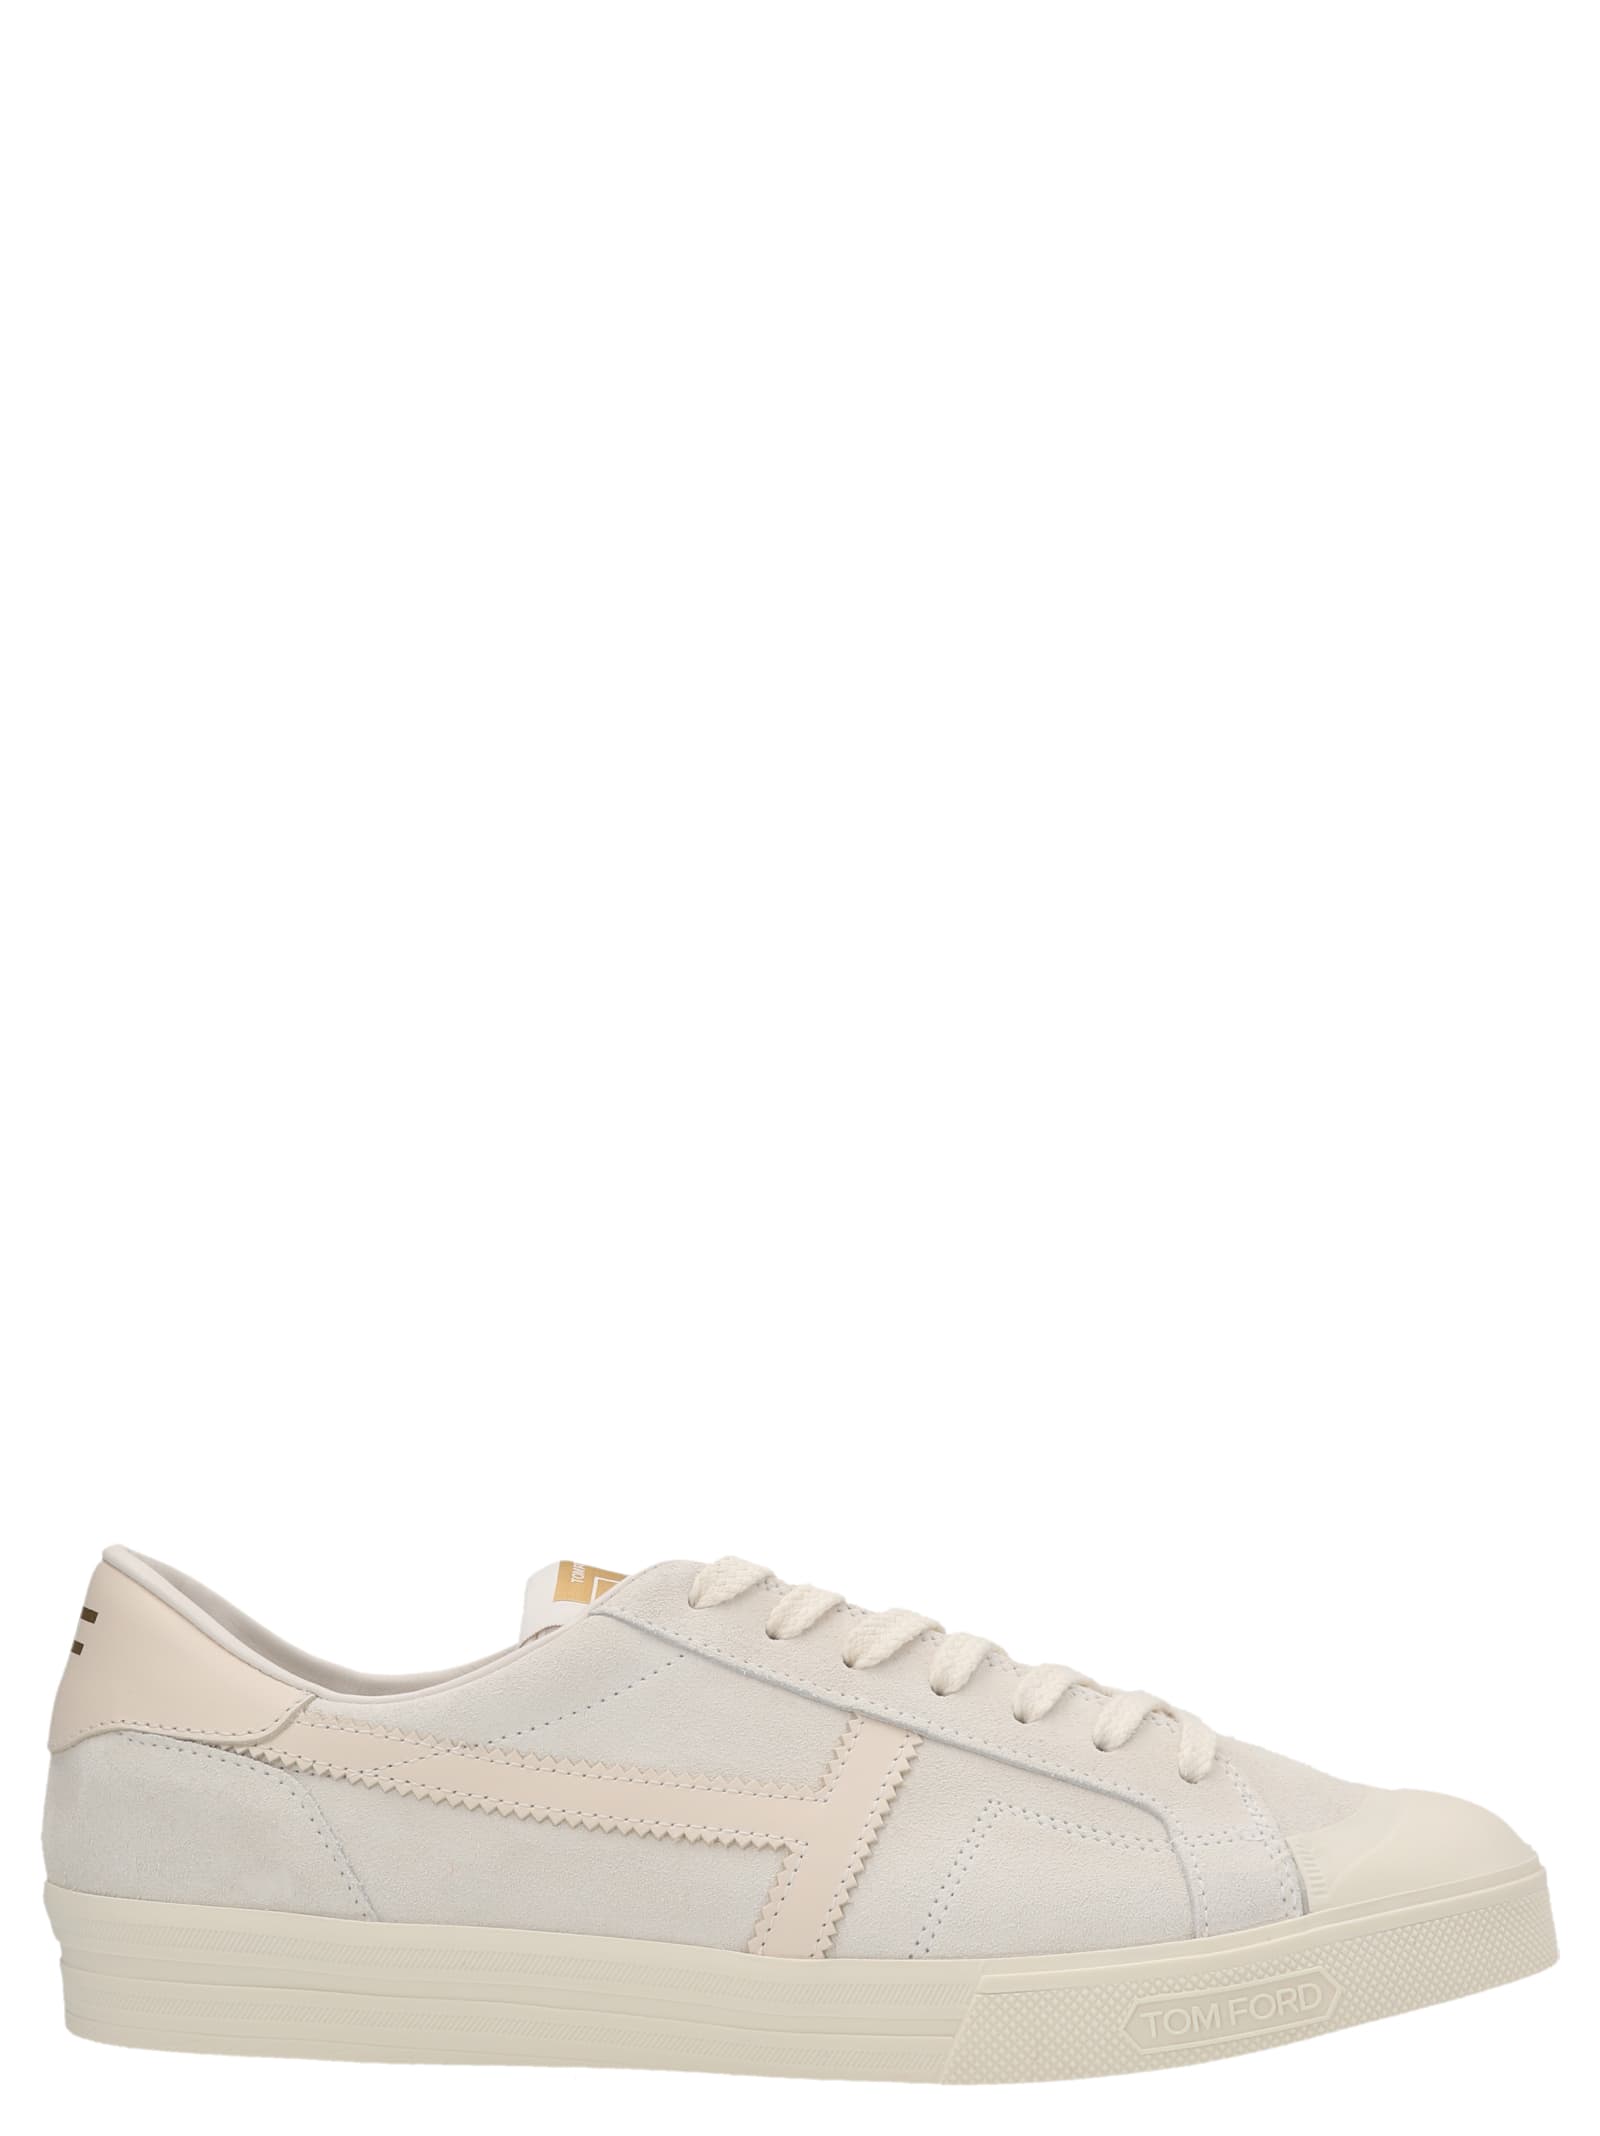 TOM FORD JARVIS trainers